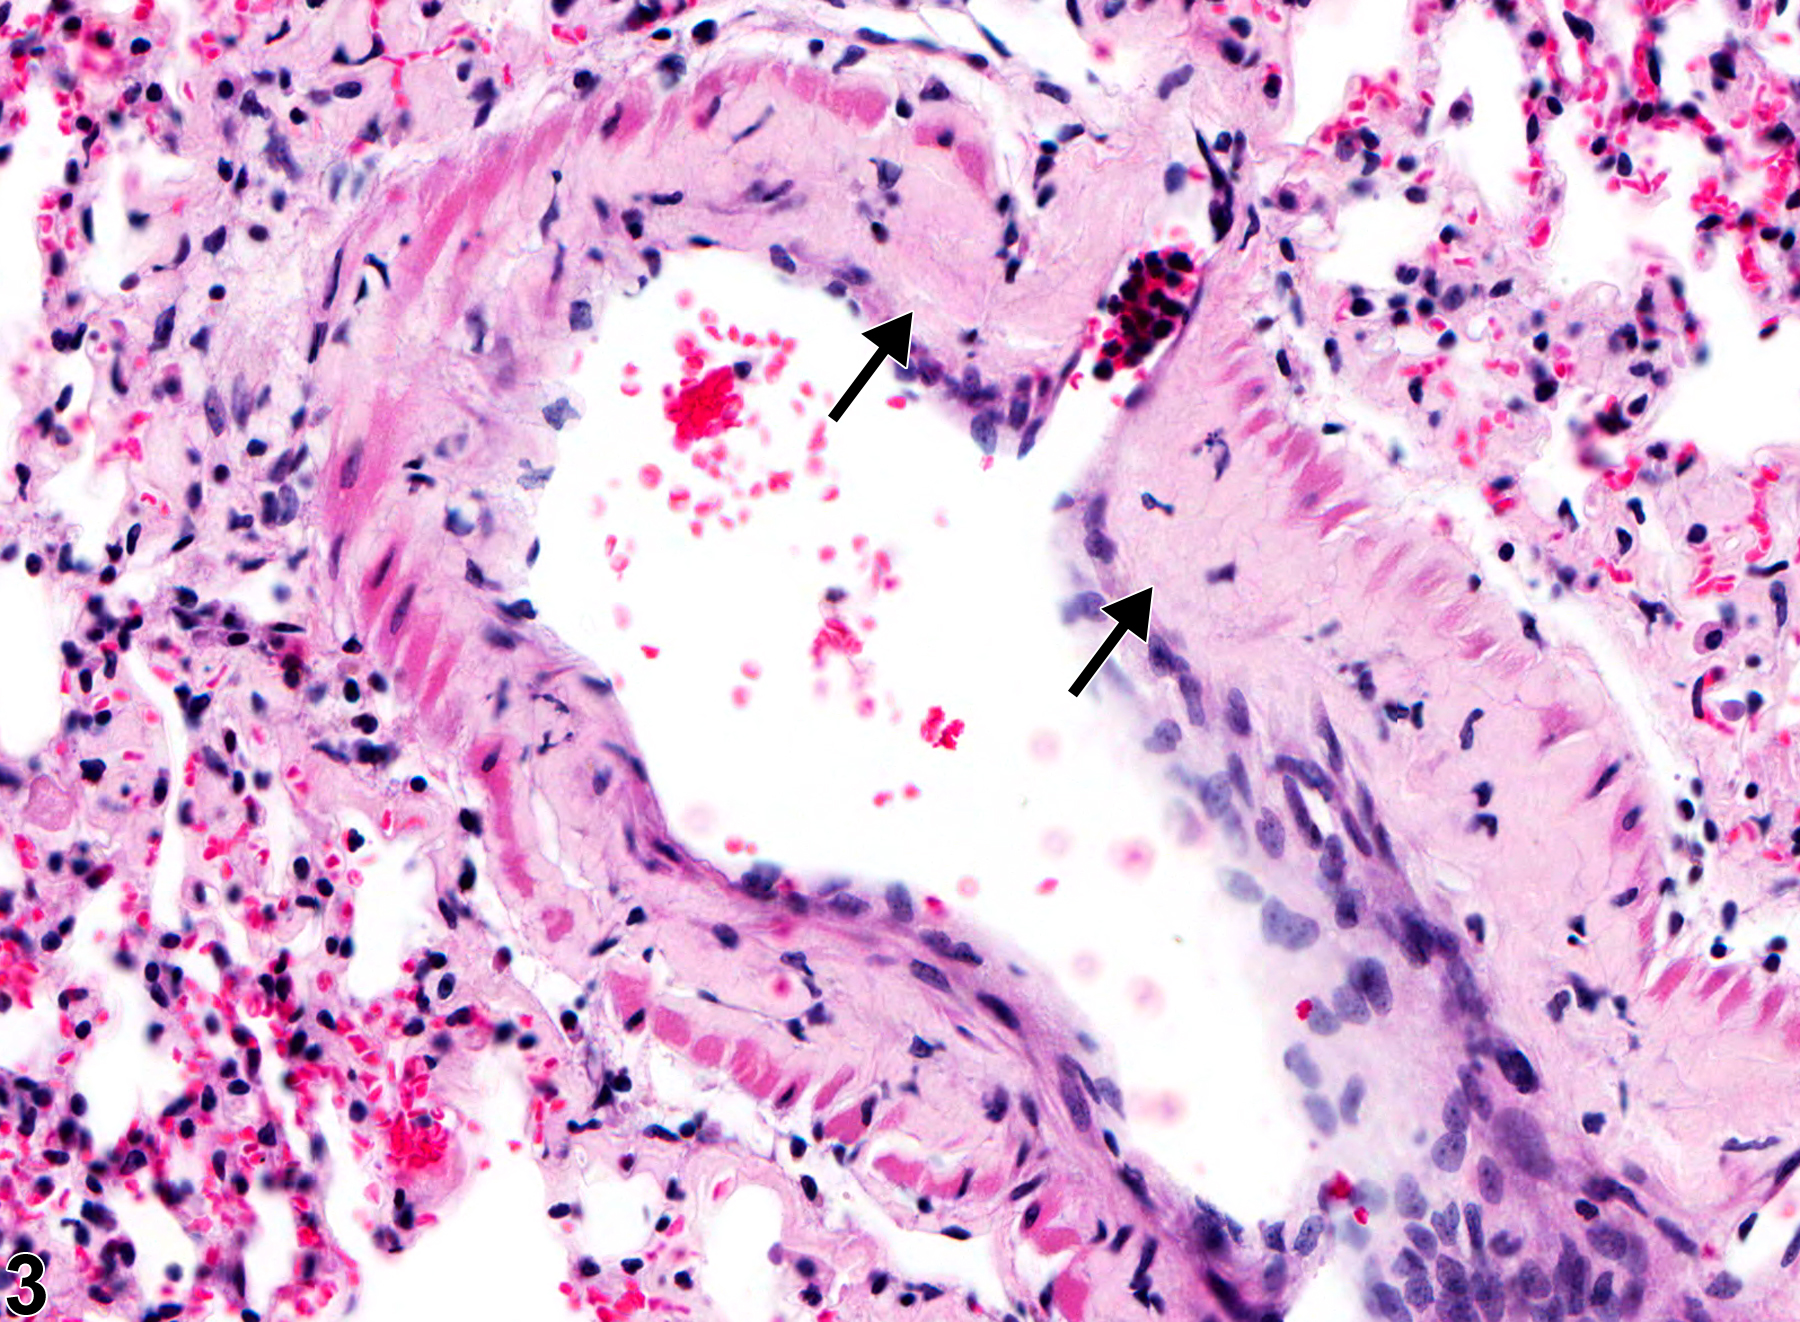 Image of amyloid in the lung from a male B6C3F1/N mouse in a chronic study